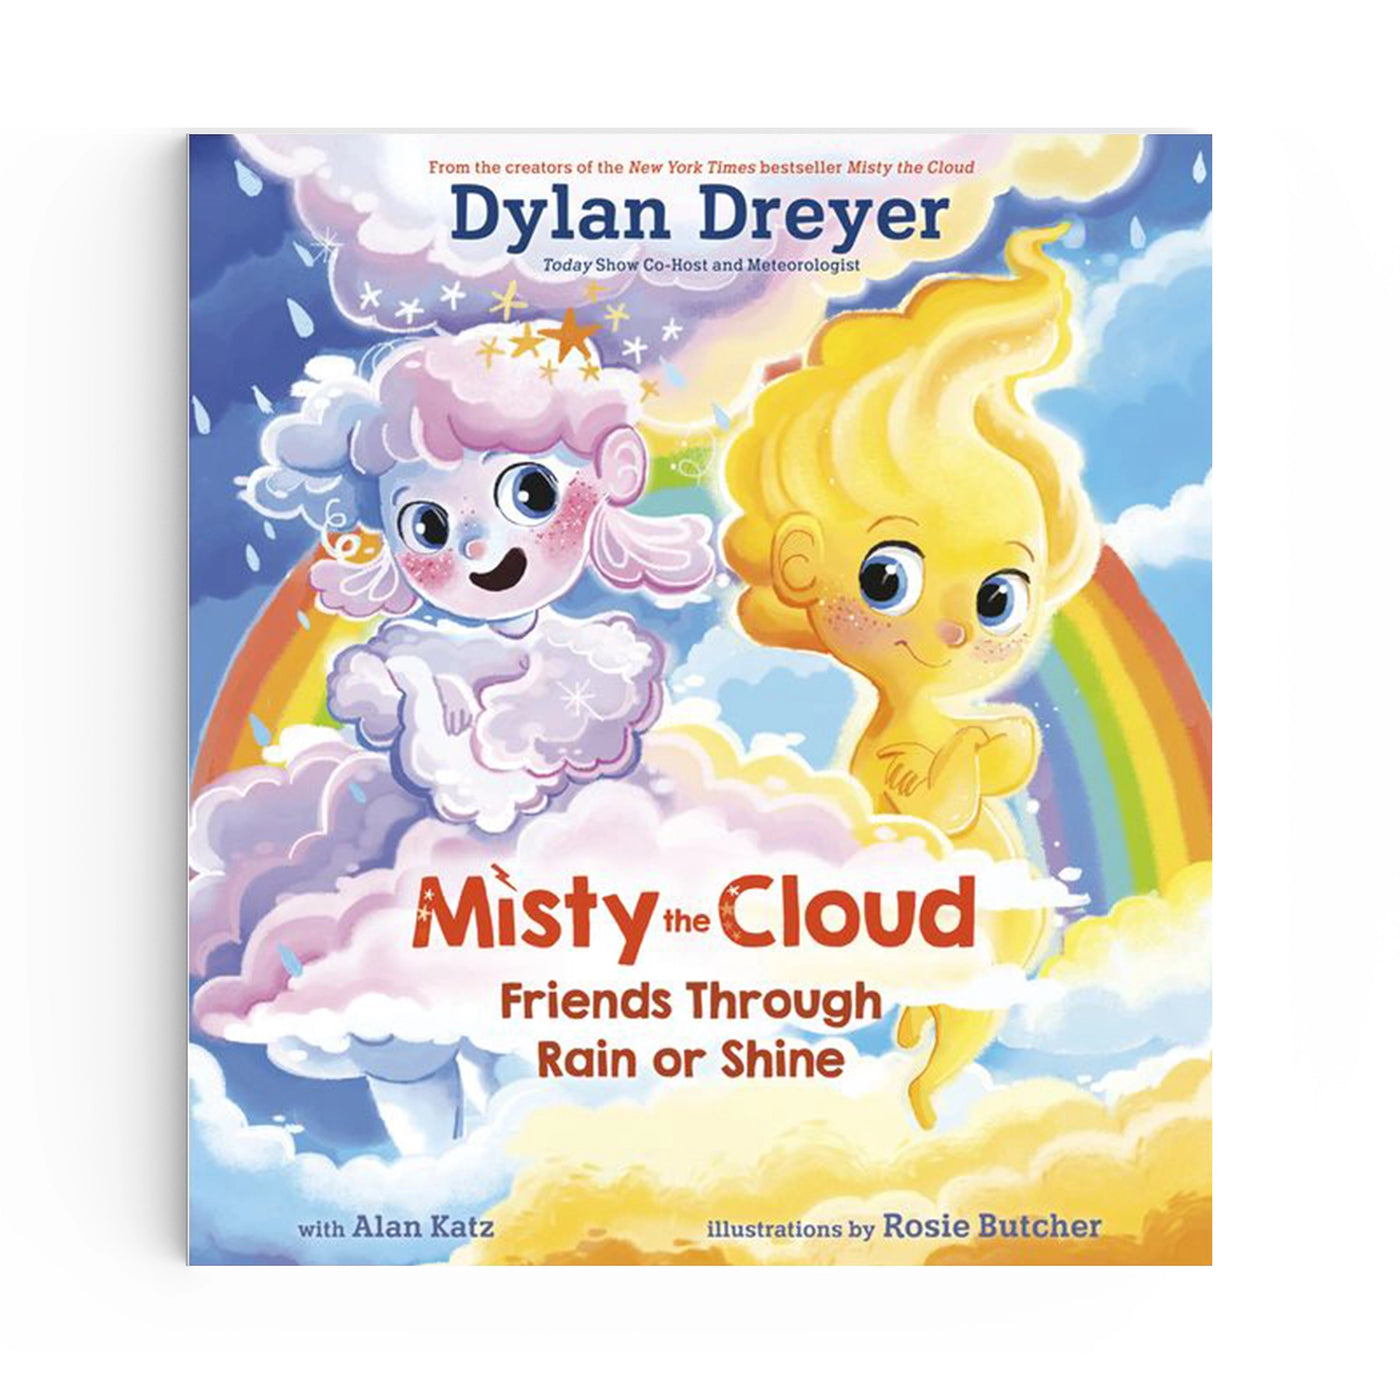 Misty the Cloud: Friends Through Rain or Shine by Dylan Dreyer